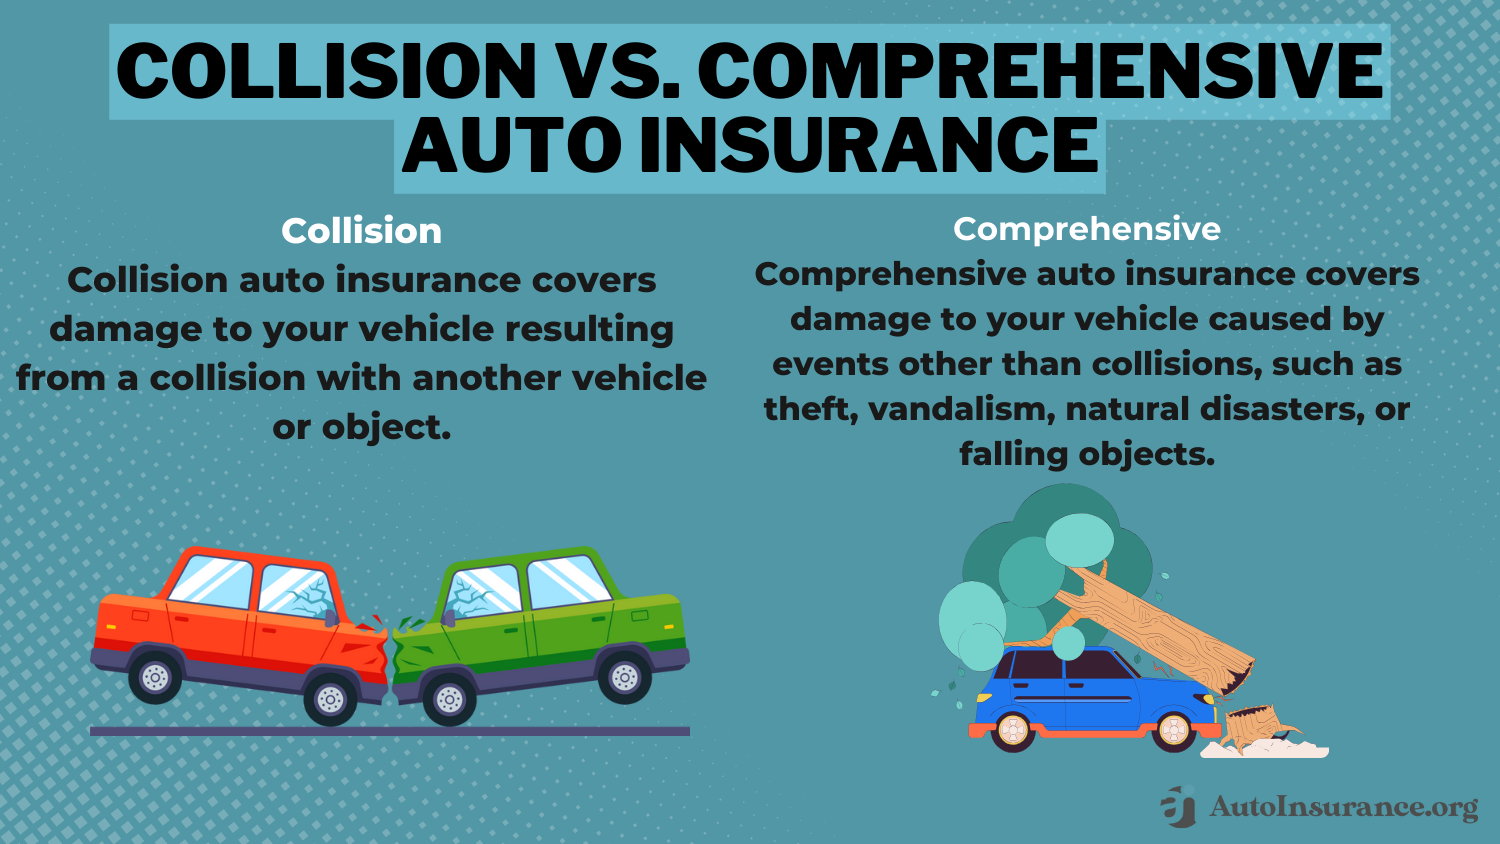 Does my auto insurance cover rental cars?: Collision vs. Comprehensive Auto Insurance Infographic